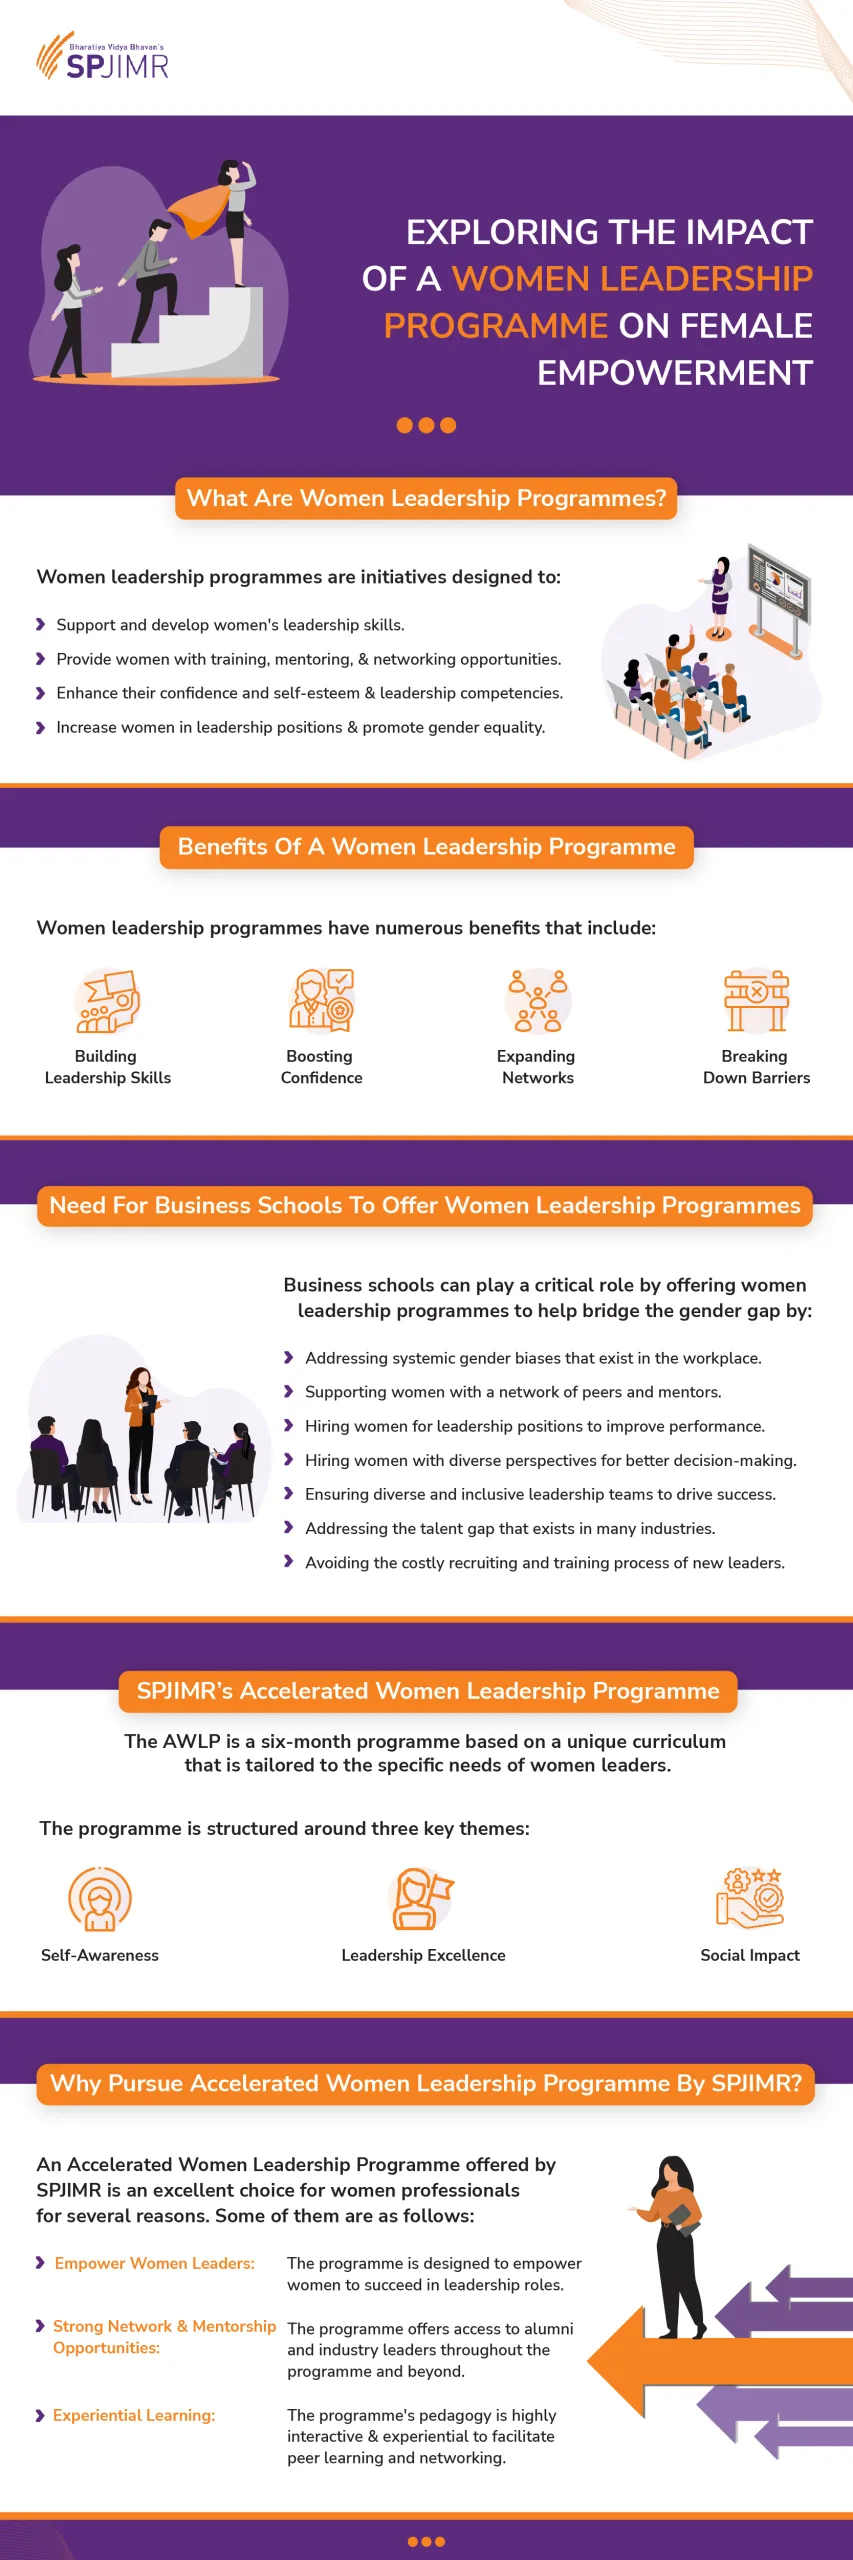 Exploring the Impact of A Women Leadership Programme on Female Empowerment